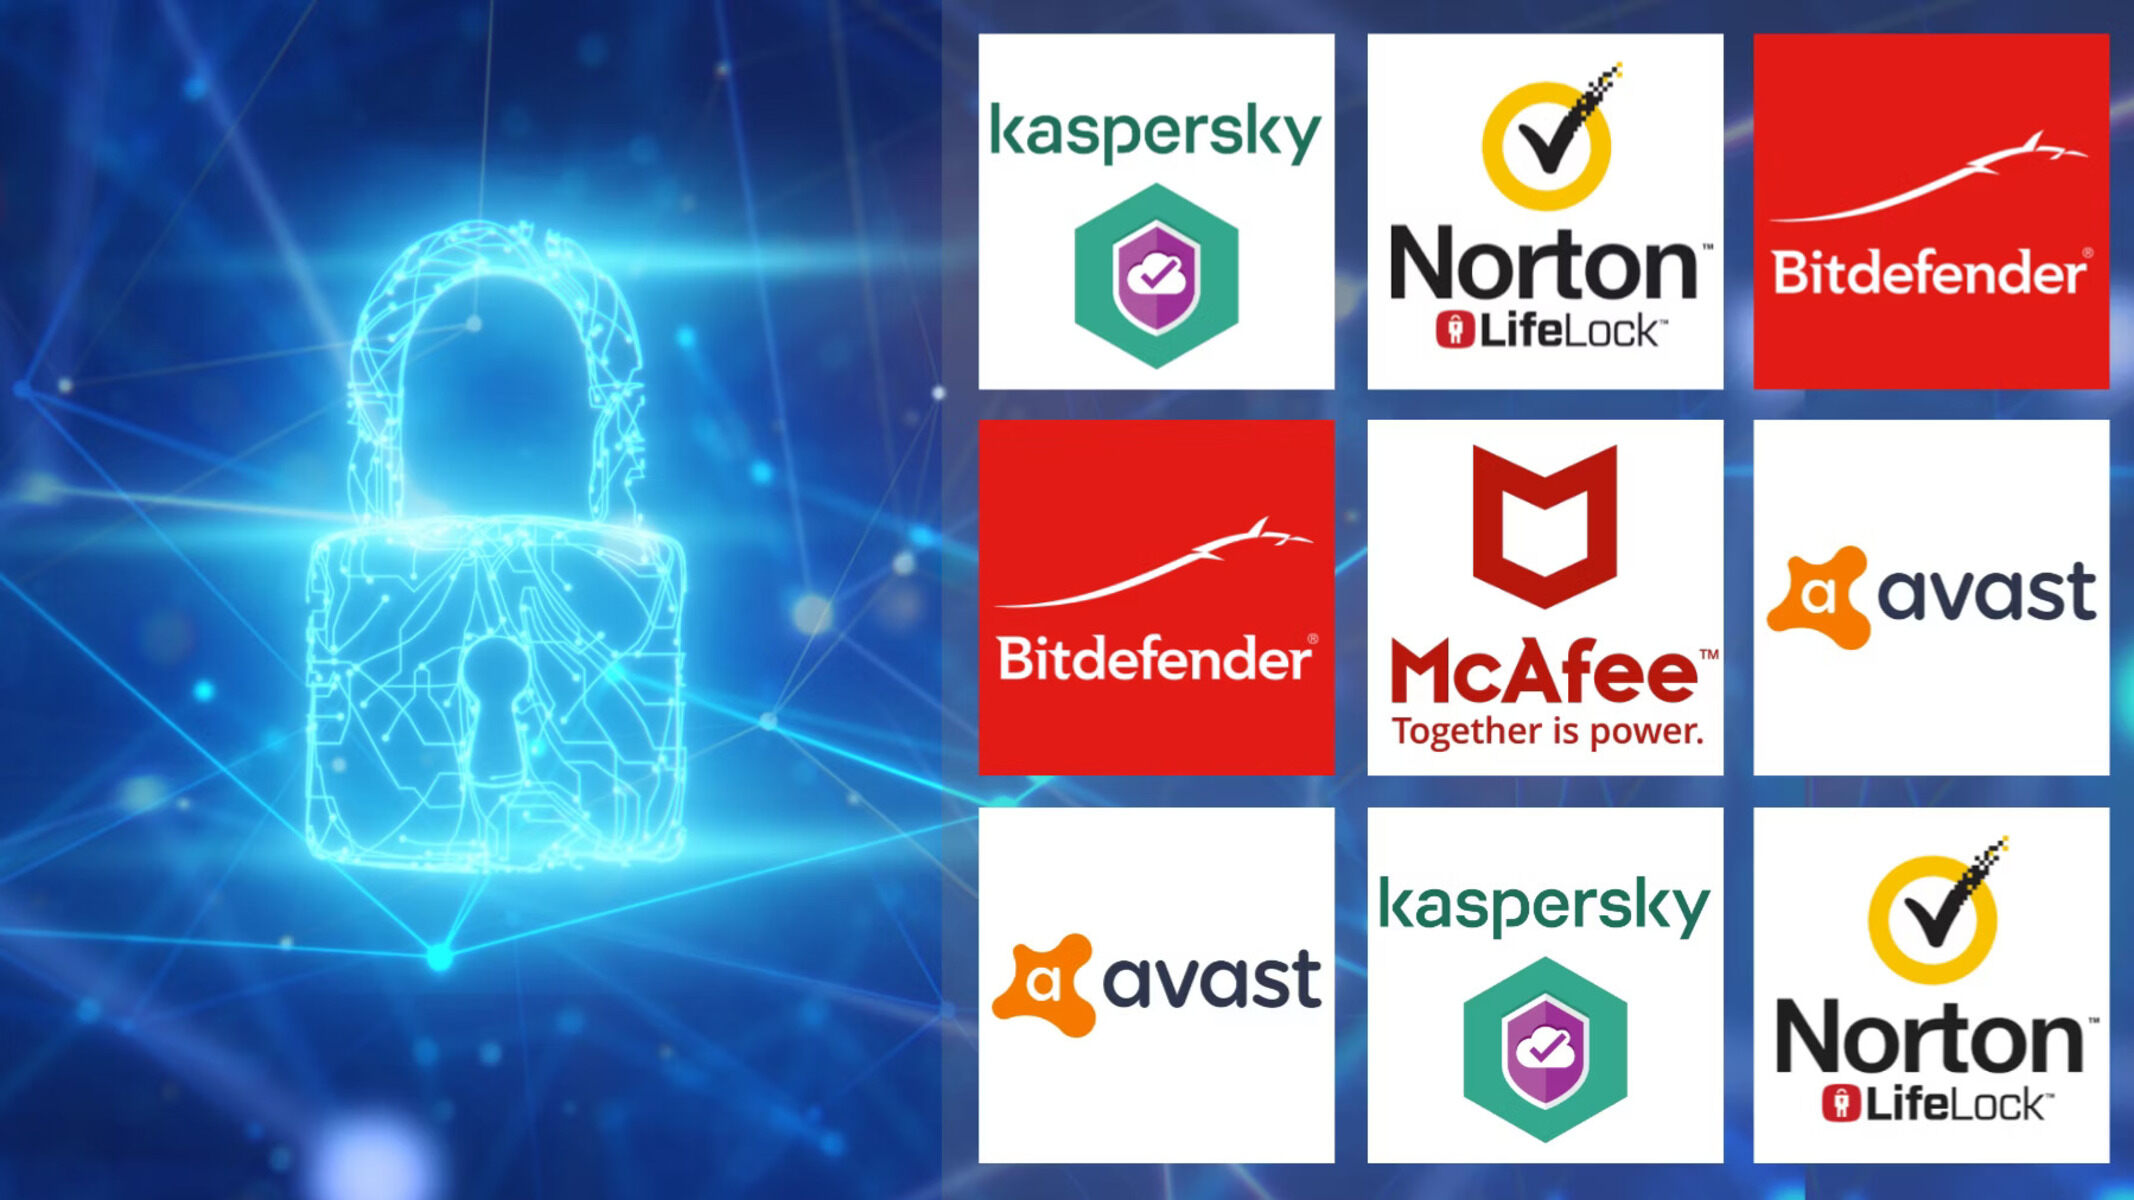 What Is The Best Internet Security Software?